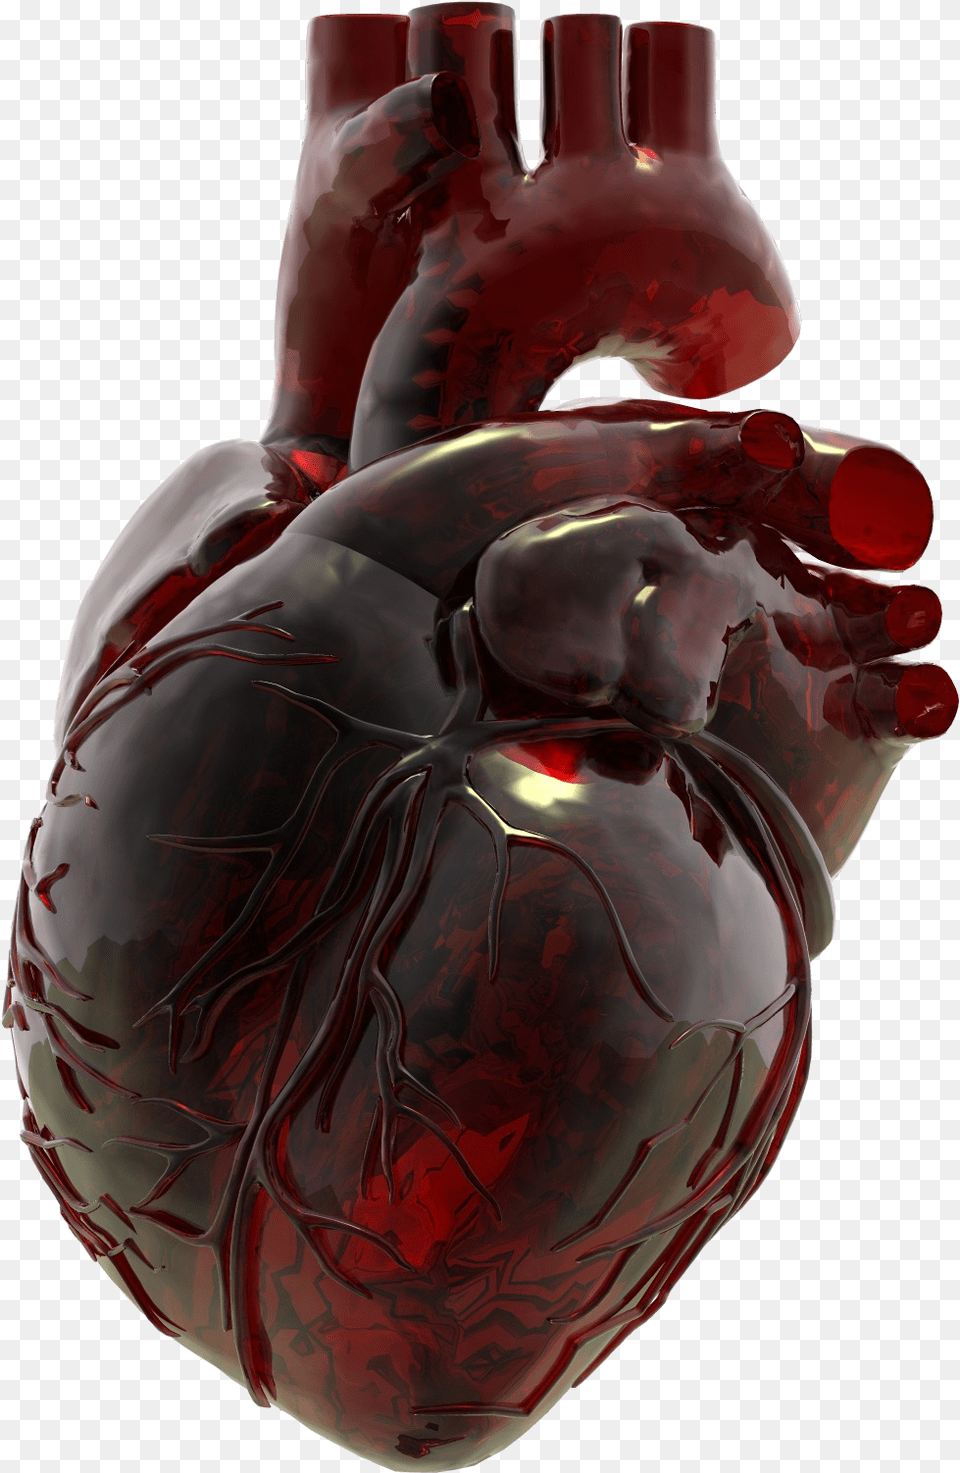 Red Glass Heart Art Human Anatomical Heart Glass Jar, Pottery, Vase Png